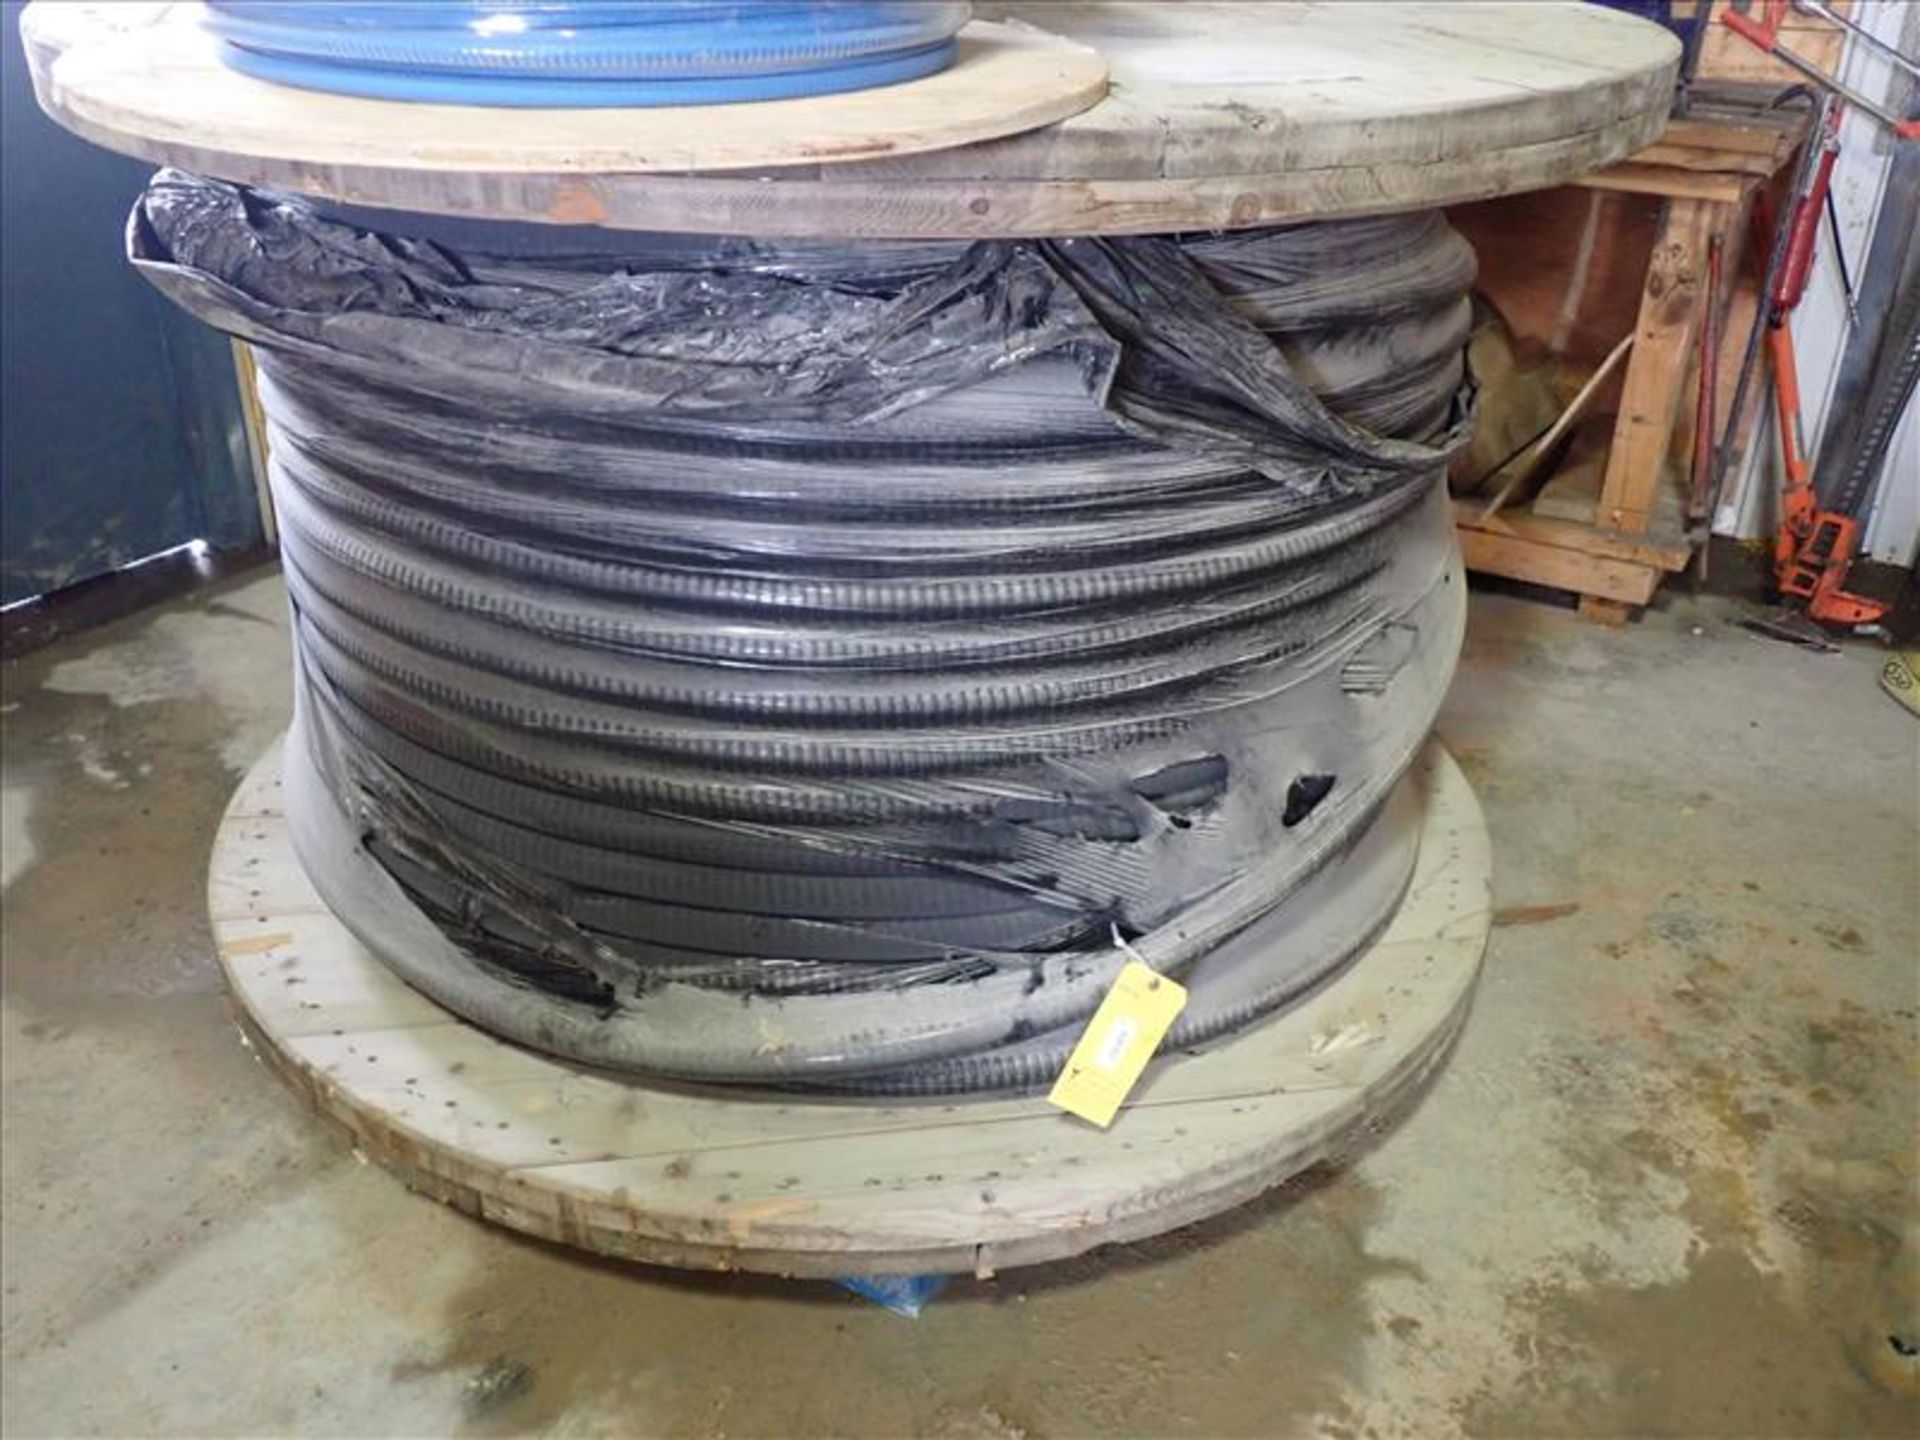 Partial Cable Reel; Texcan Teck 4/0 3/C CU 1KV A/A (Subject to confirmation. The winner will be